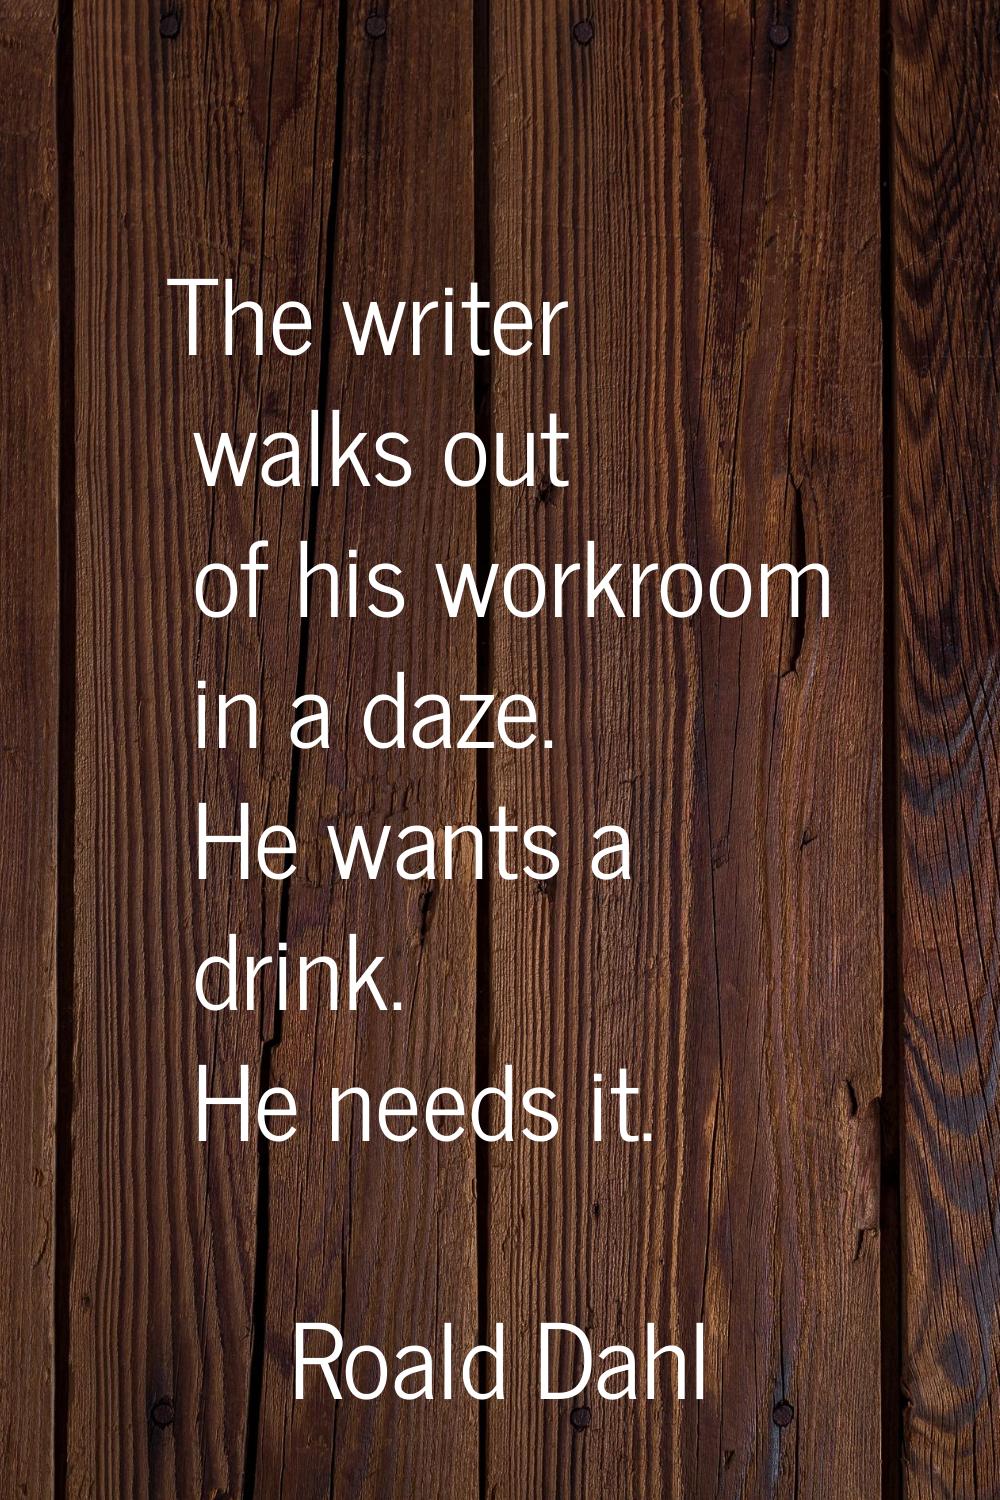 The writer walks out of his workroom in a daze. He wants a drink. He needs it.